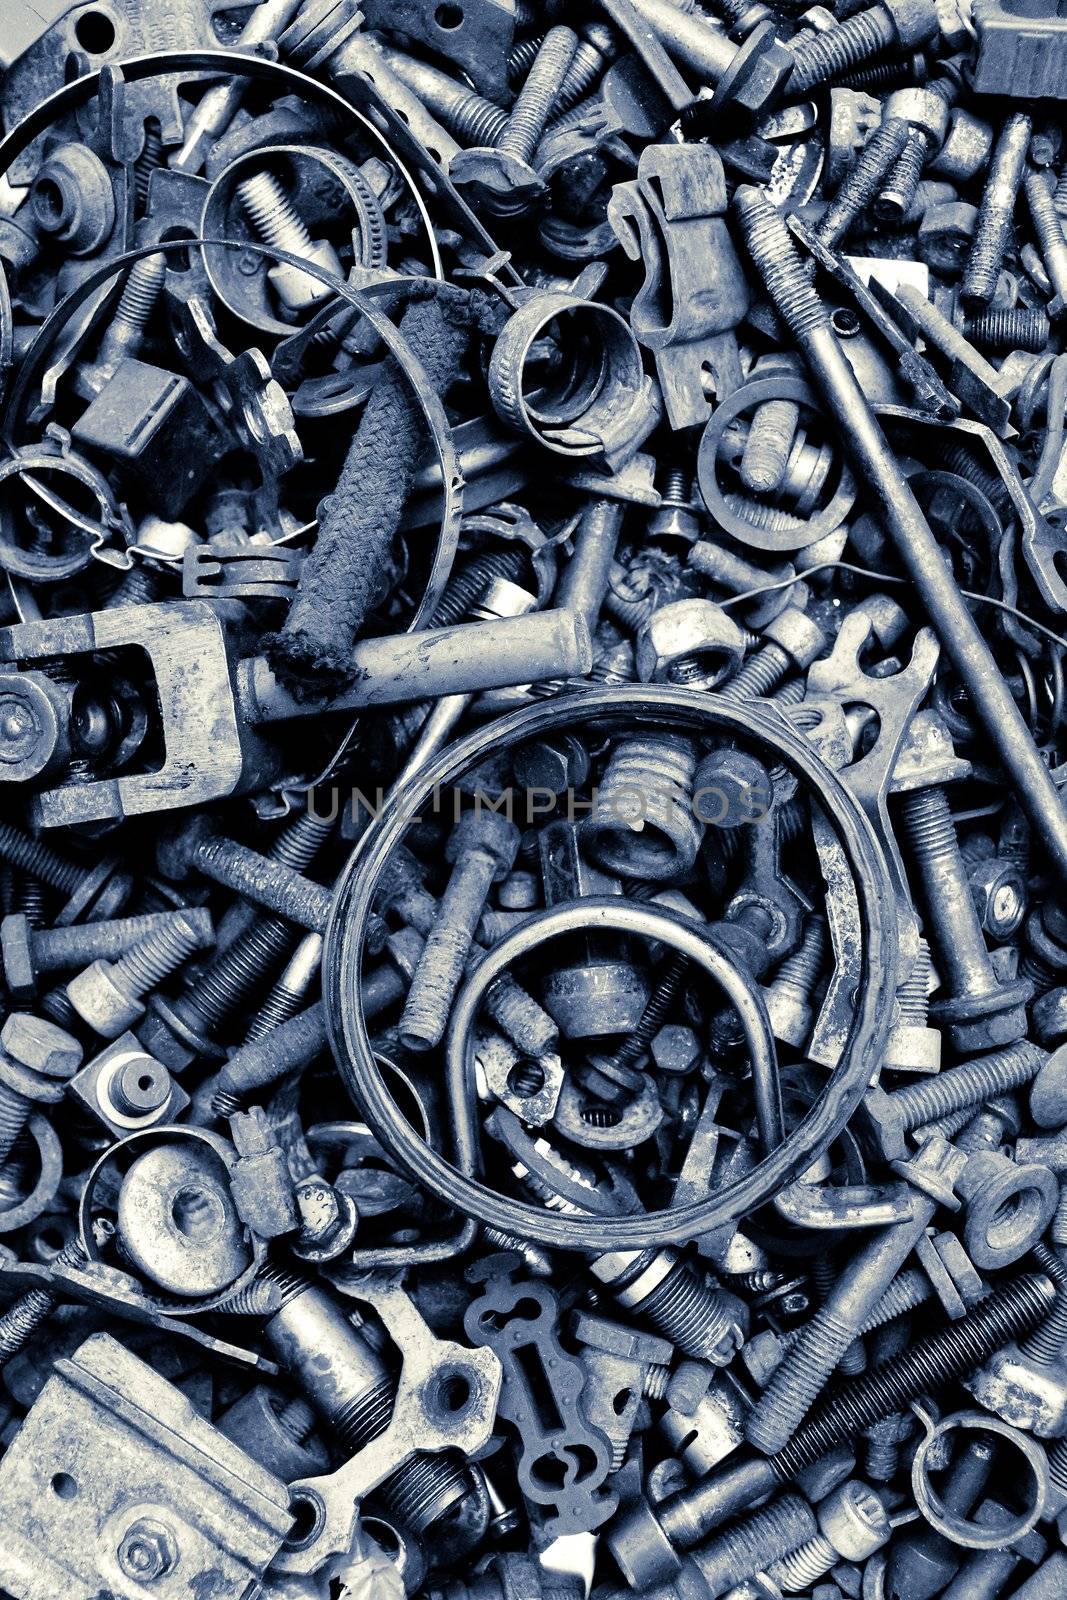 Assorted old hand tools background